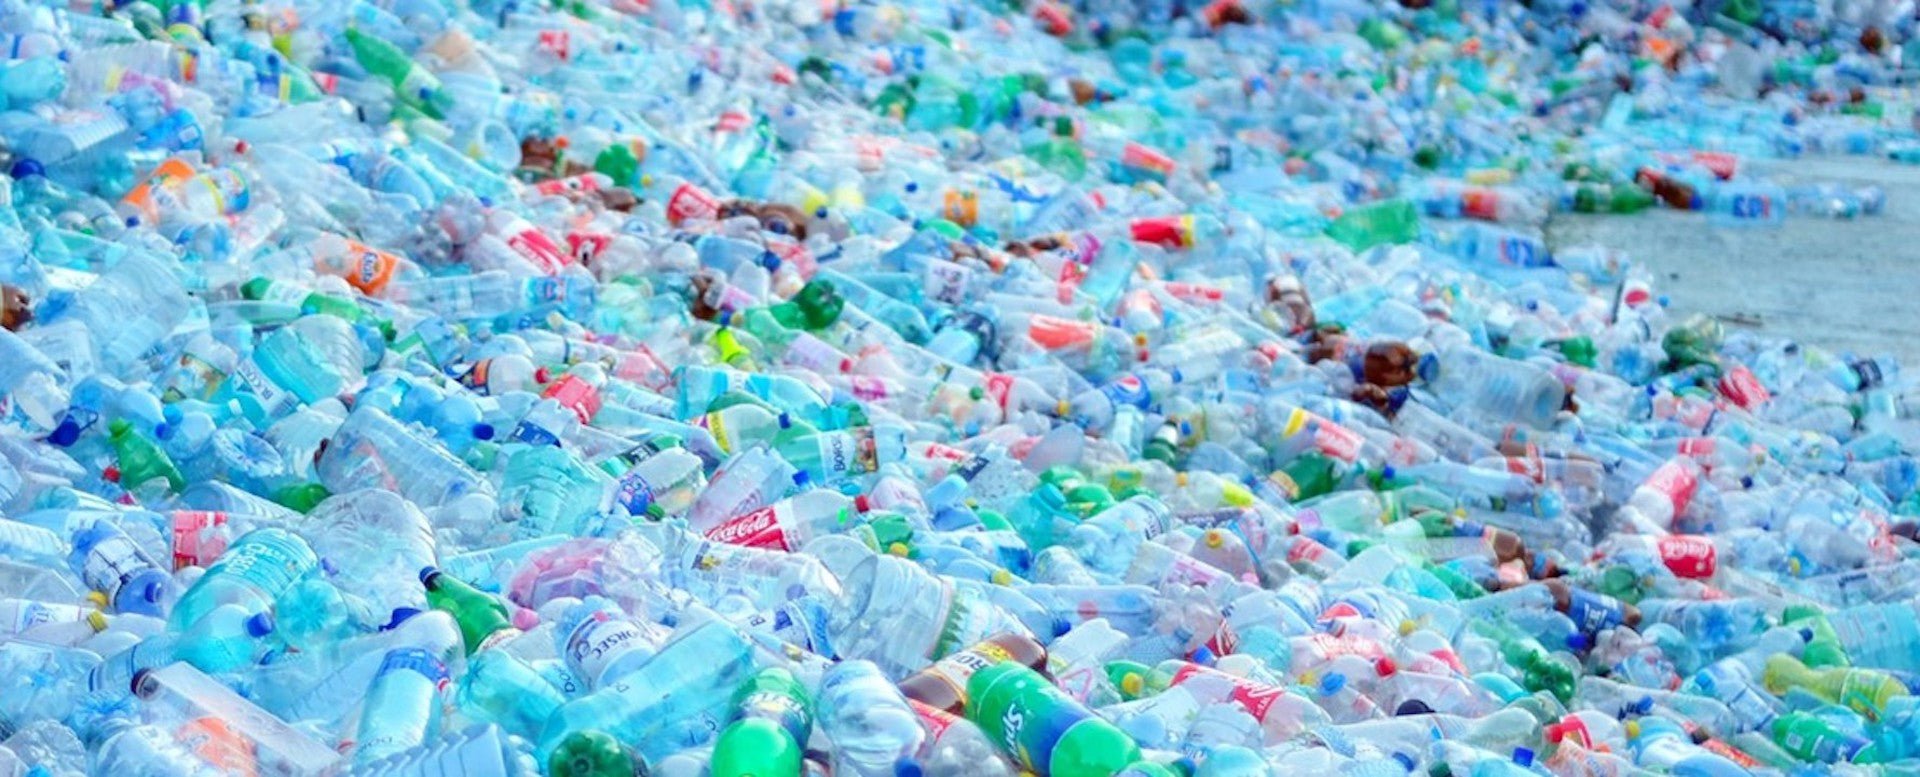 Is a Plastic-Free World Possible? - IF Water